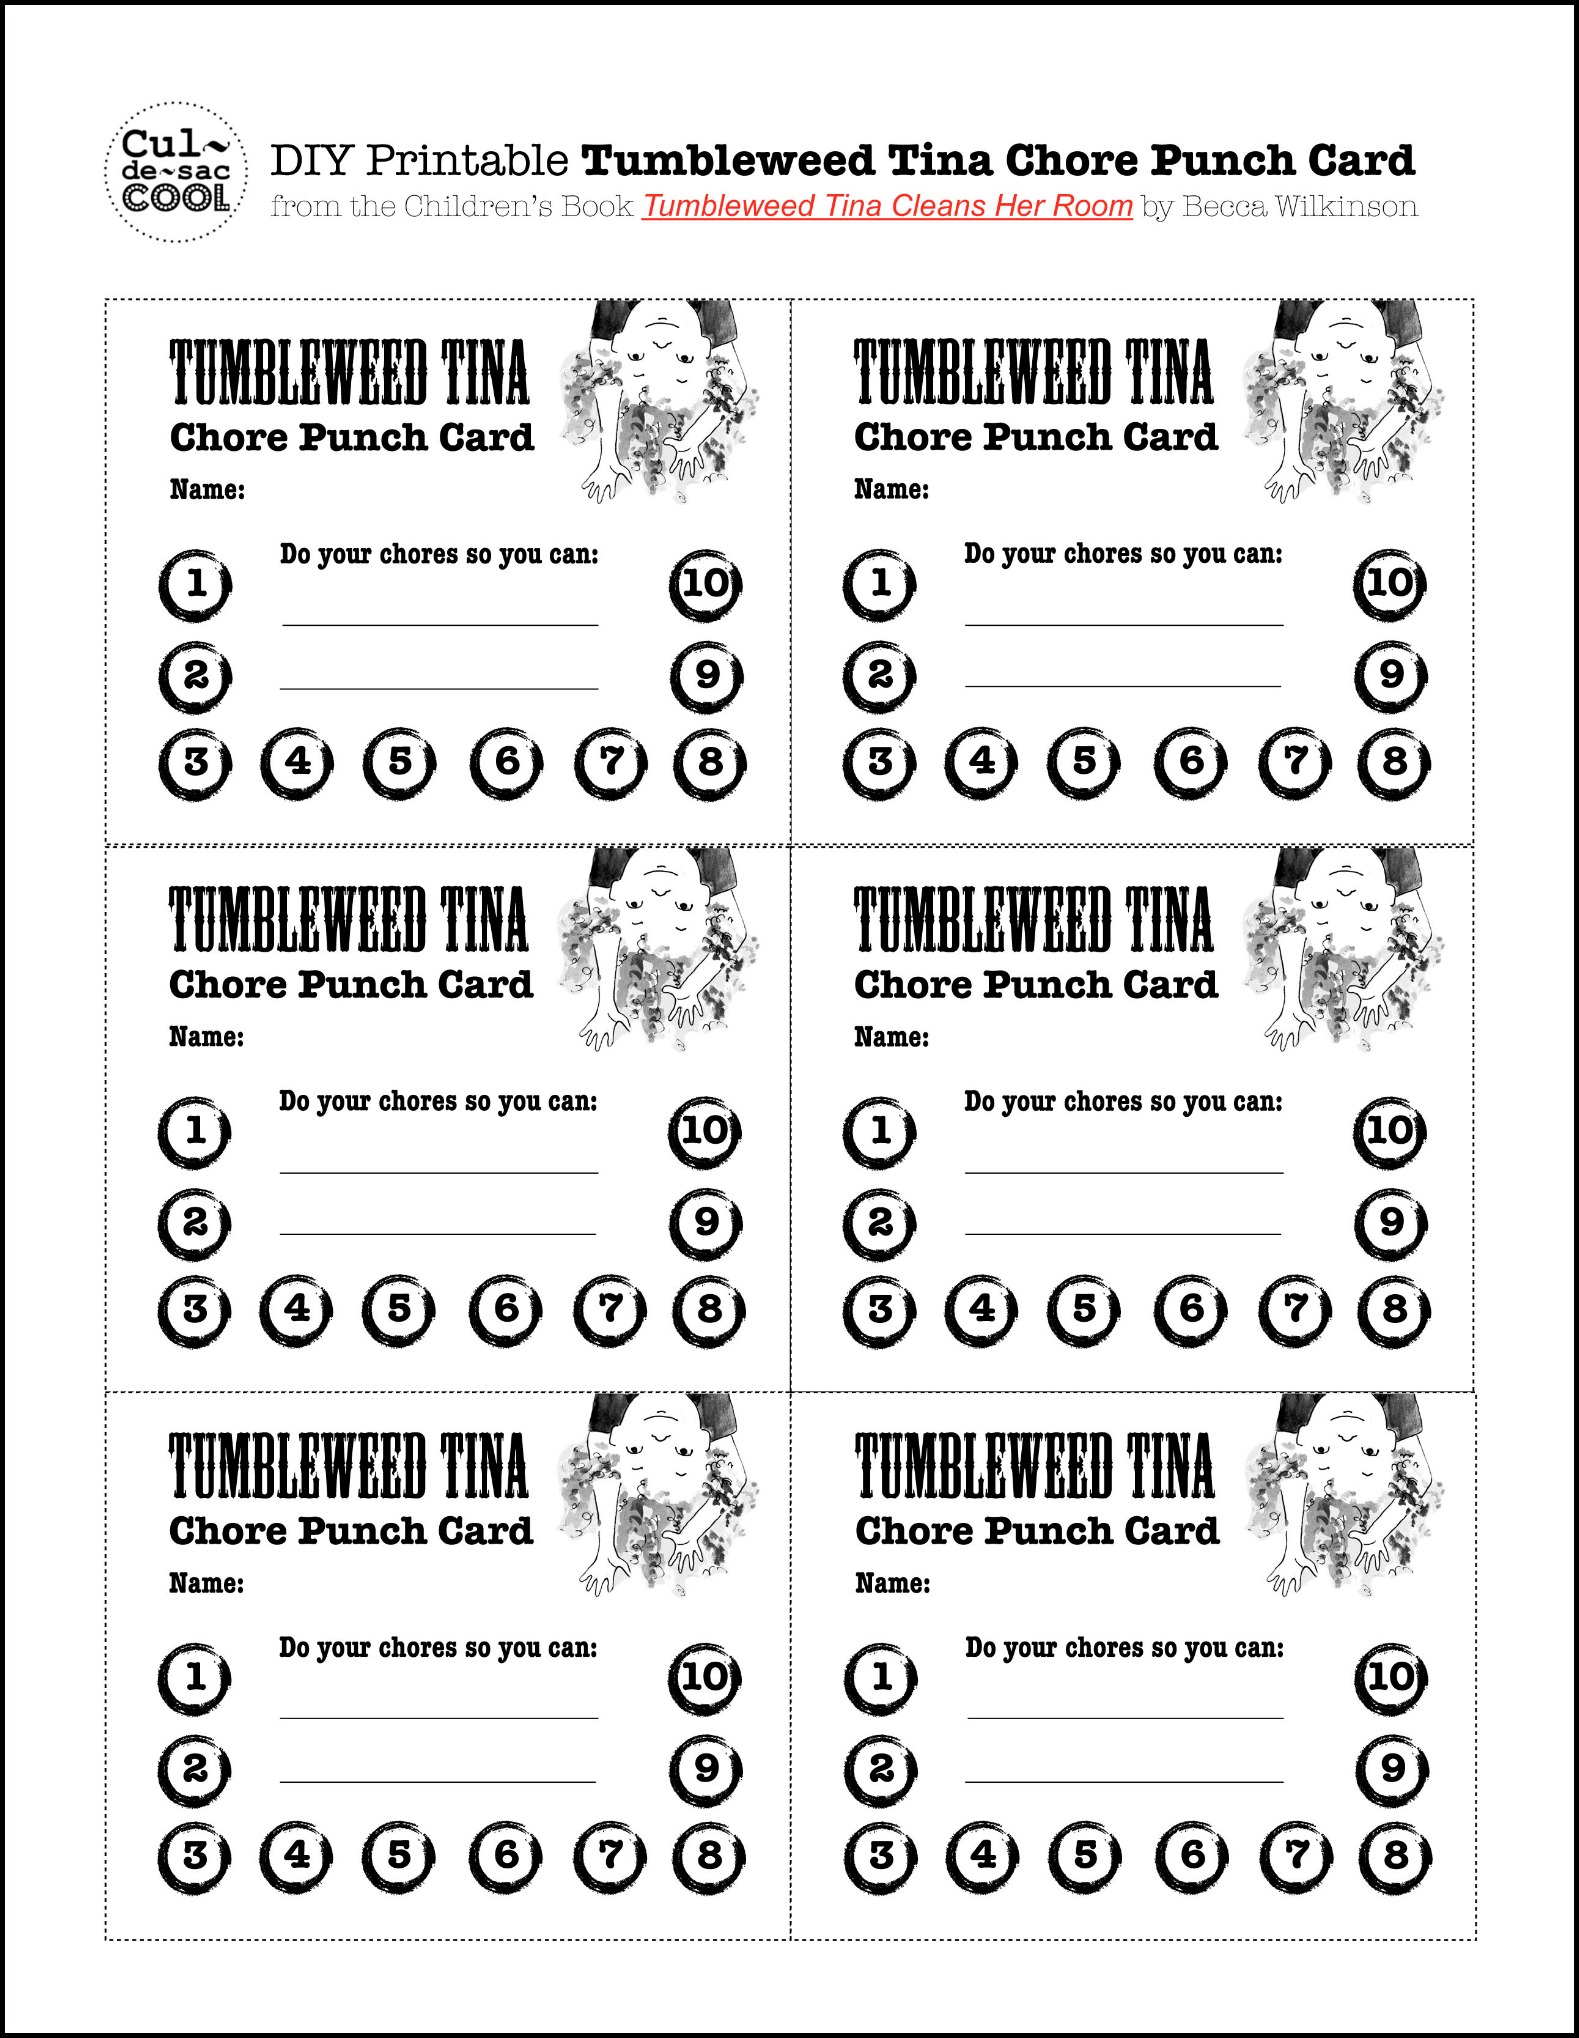 DIY Printable Tumbleweed Tina Chore Punch Card from the Children